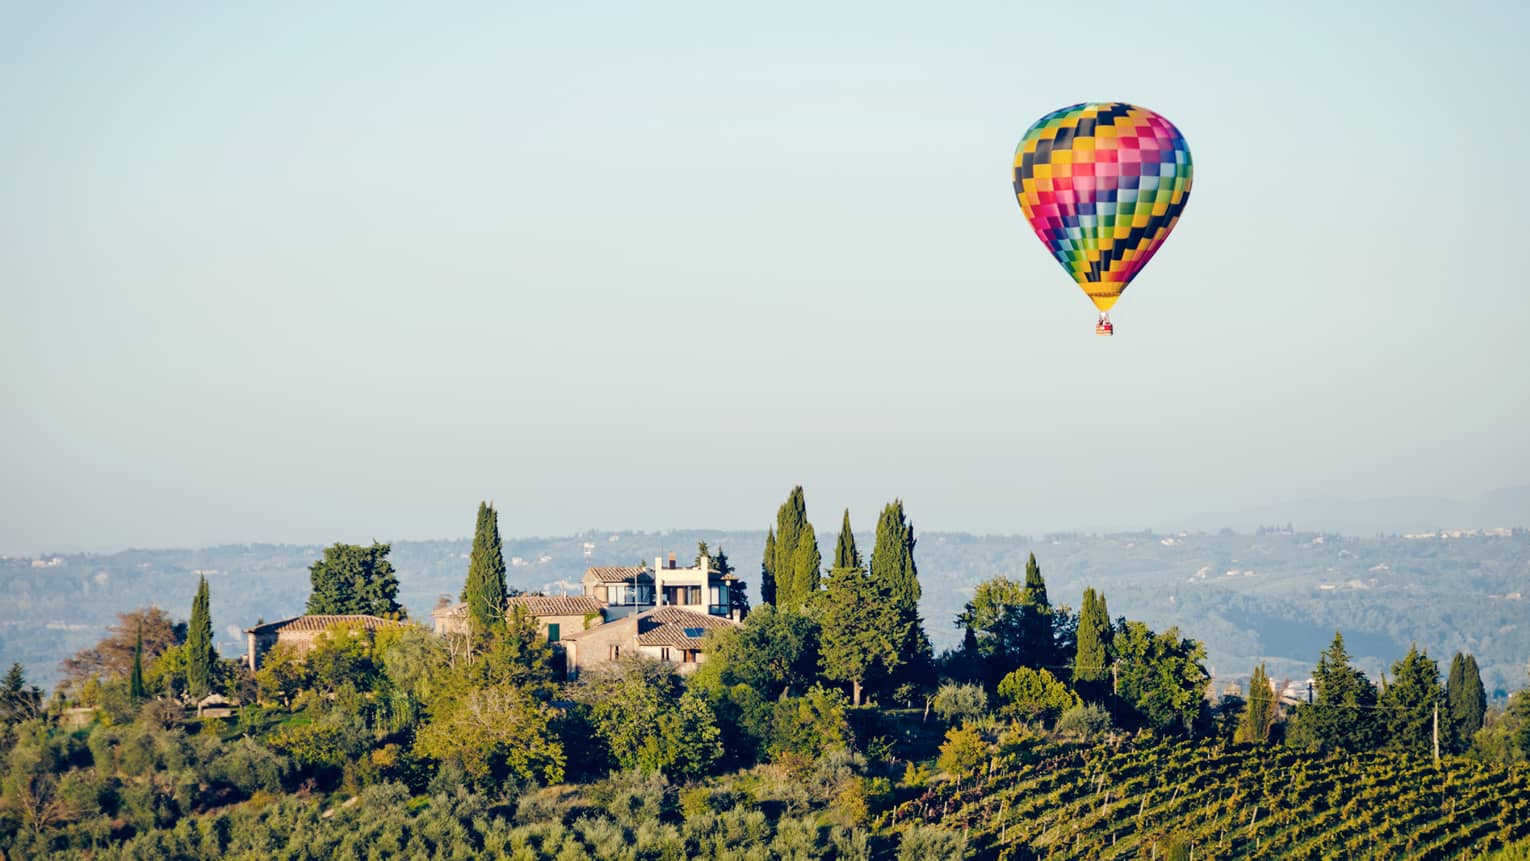 A colorful hot air balloon hovering over a vineyard in Florence